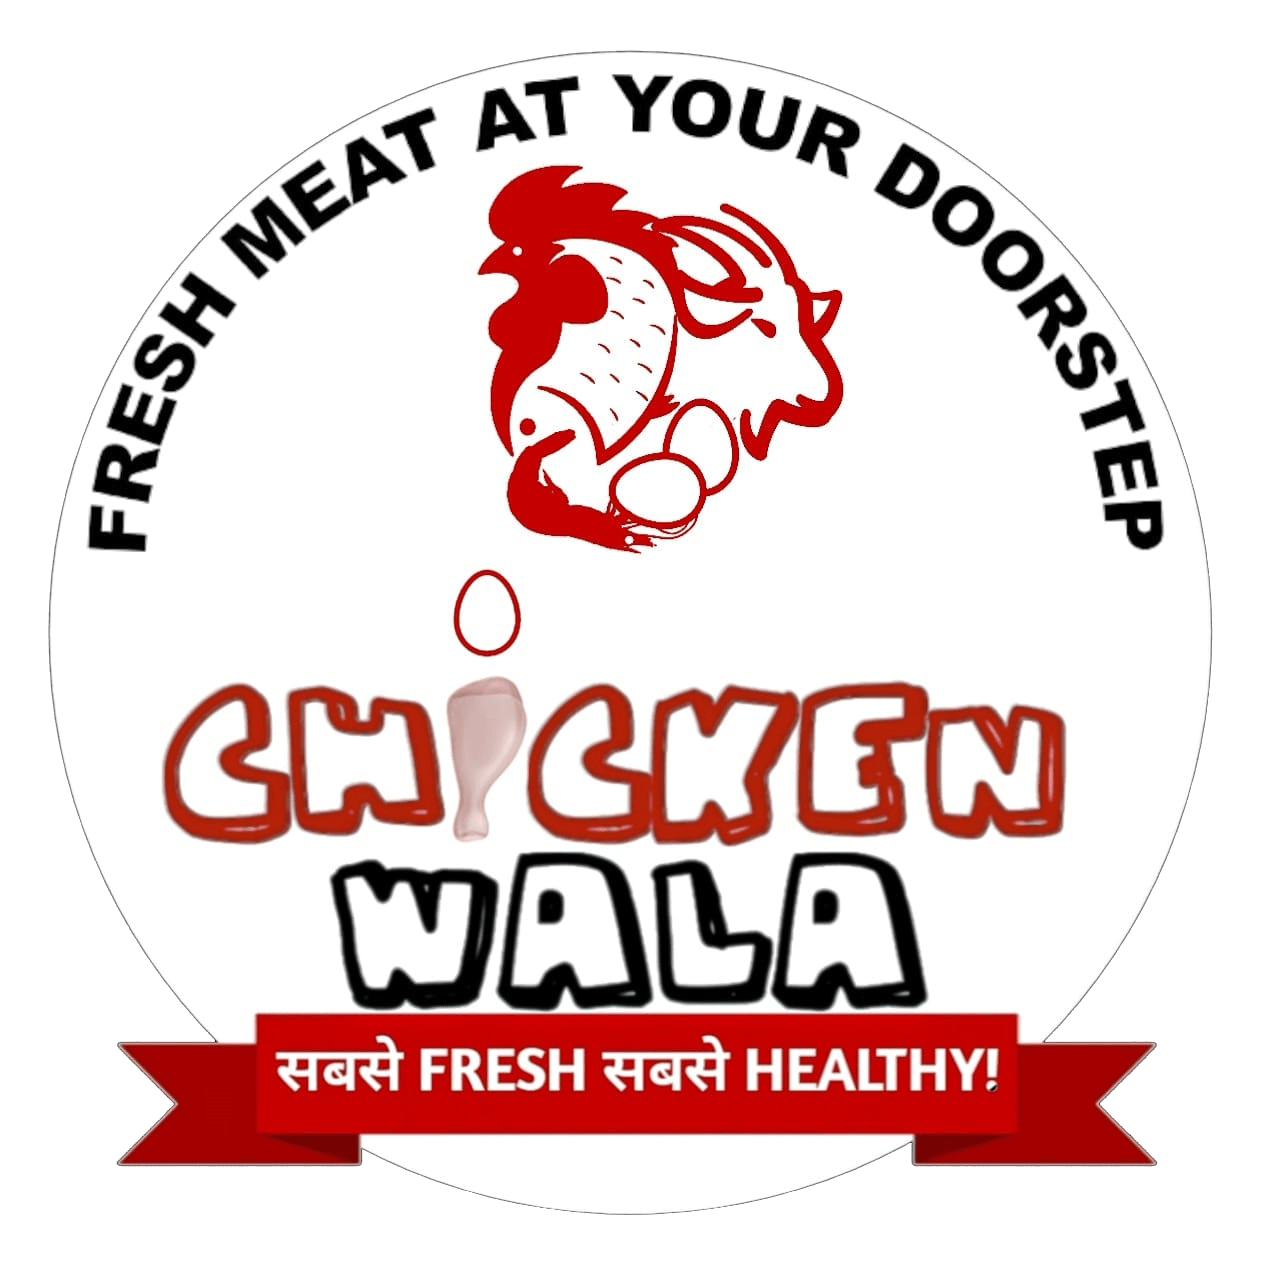 Online raw meat delivery in patna|
Fresh meat delivery in patna|Meat home delivery in patna| patna meat delivery service|Halal meat delivery in patna|
Non-veg food delivery in patna|Chicken, mutton, and fish delivery  in patna|Local meat delivery in patna|Top meat suppliers in patna|
Farm-fresh meat delivery in patna|
Raw chicken delivery in patna|
Fresh chicken home delivery  in patna|
Chicken meat online delivery in patna|
 patna chicken suppliers
Halal chicken delivery in patna|
Local chicken delivery service  in patna|
Farm-fresh chicken delivery in patna|
Best chicken meat delivery in patna|
Chicken shop with home delivery in patna|
Online chicken purchase in patna|
Prawn delivery in patna|
Fresh prawn home delivery  in patna|
Online prawn delivery in patna|
Prawn seafood delivery in patna|
 patna prawn suppliers
Local prawn delivery service in patna|
Farm-fresh prawn delivery in patna|
Best prawn delivery in patna|
Prawn shop with home delivery in patna|
Online prawn purchase in patna|
Chicken delivery in patna|
Fresh chicken home delivery in patna|
Online chicken delivery in patna|
Chicken meat delivery in patna|
 patna chicken suppliers
Local chicken delivery service in patna|
Farm-fresh chicken delivery in patna|
Best chicken delivery in patna|
Chicken shop with home delivery in patna|
Online chicken purchase in patna|
Order fresh chicken in patna|
 Fresh raw chicken mutton fish seafood|fresh farm chicken in patna|
Fresh chicken in Patna|
Quality mutton delivery Patna|
Buy fish online Patna|
Farm-fresh eggs Patna|
Seafood delivery in Patna|
raw meat shop near me|
Online meat delivery Patna|
Halal meat in Patna|
Best meat market Patna|
Local butcher Patna|
Online raw meat delivery in patna|